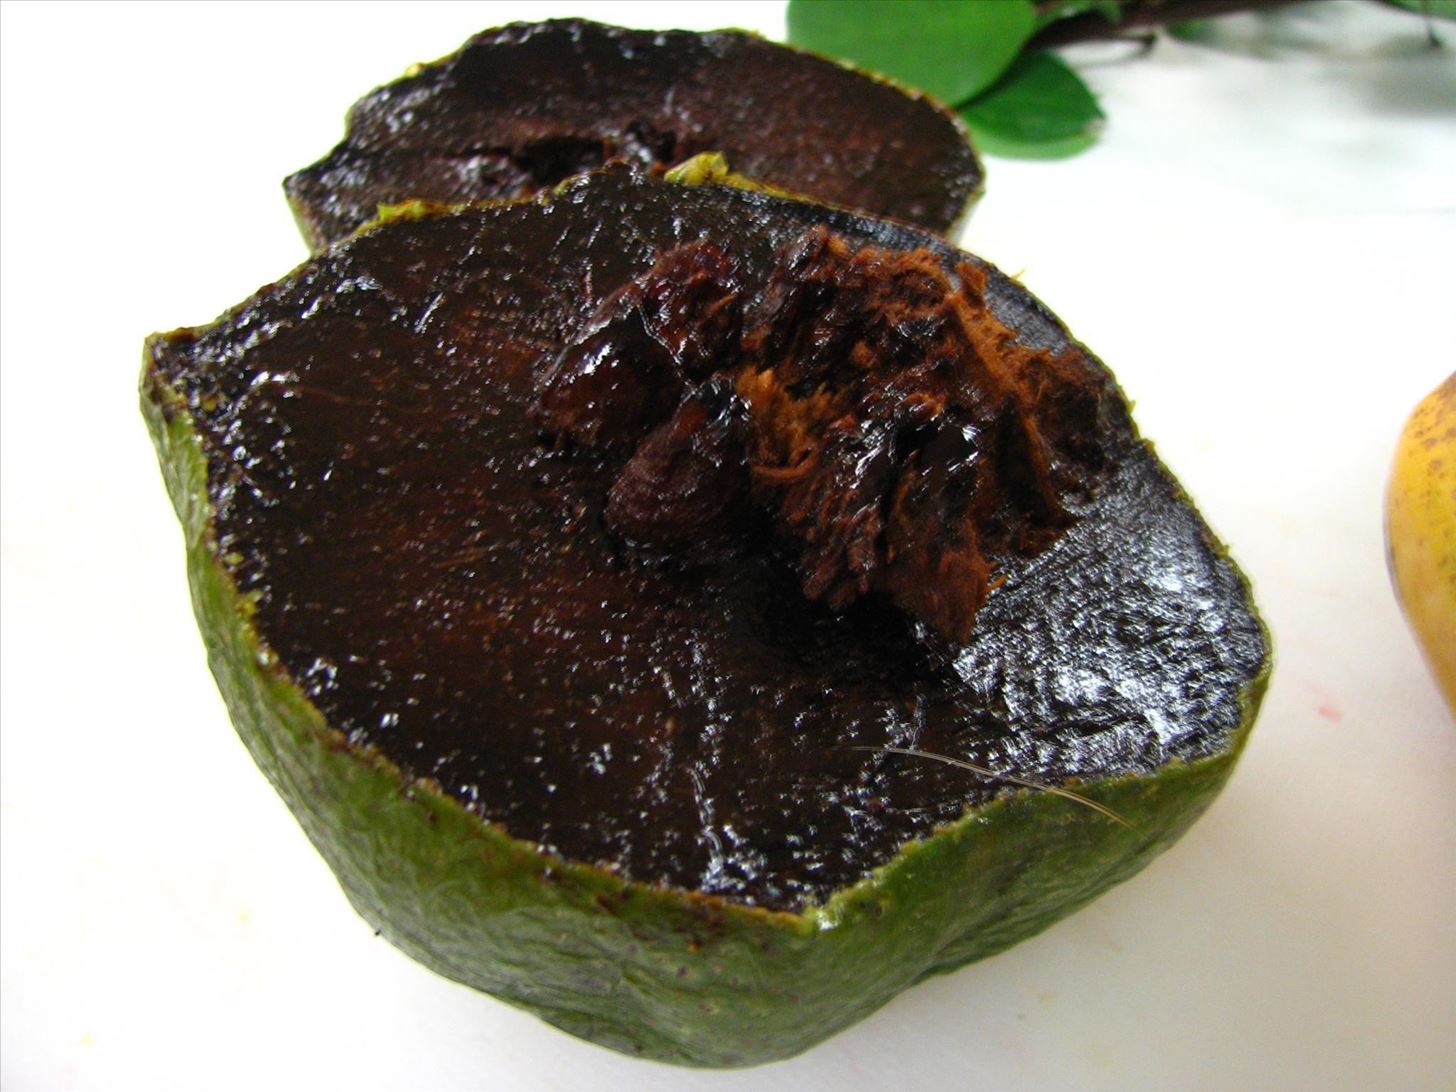 Weird Ingredient Wednesday: Black Sapote (The Chocolate Fruit)